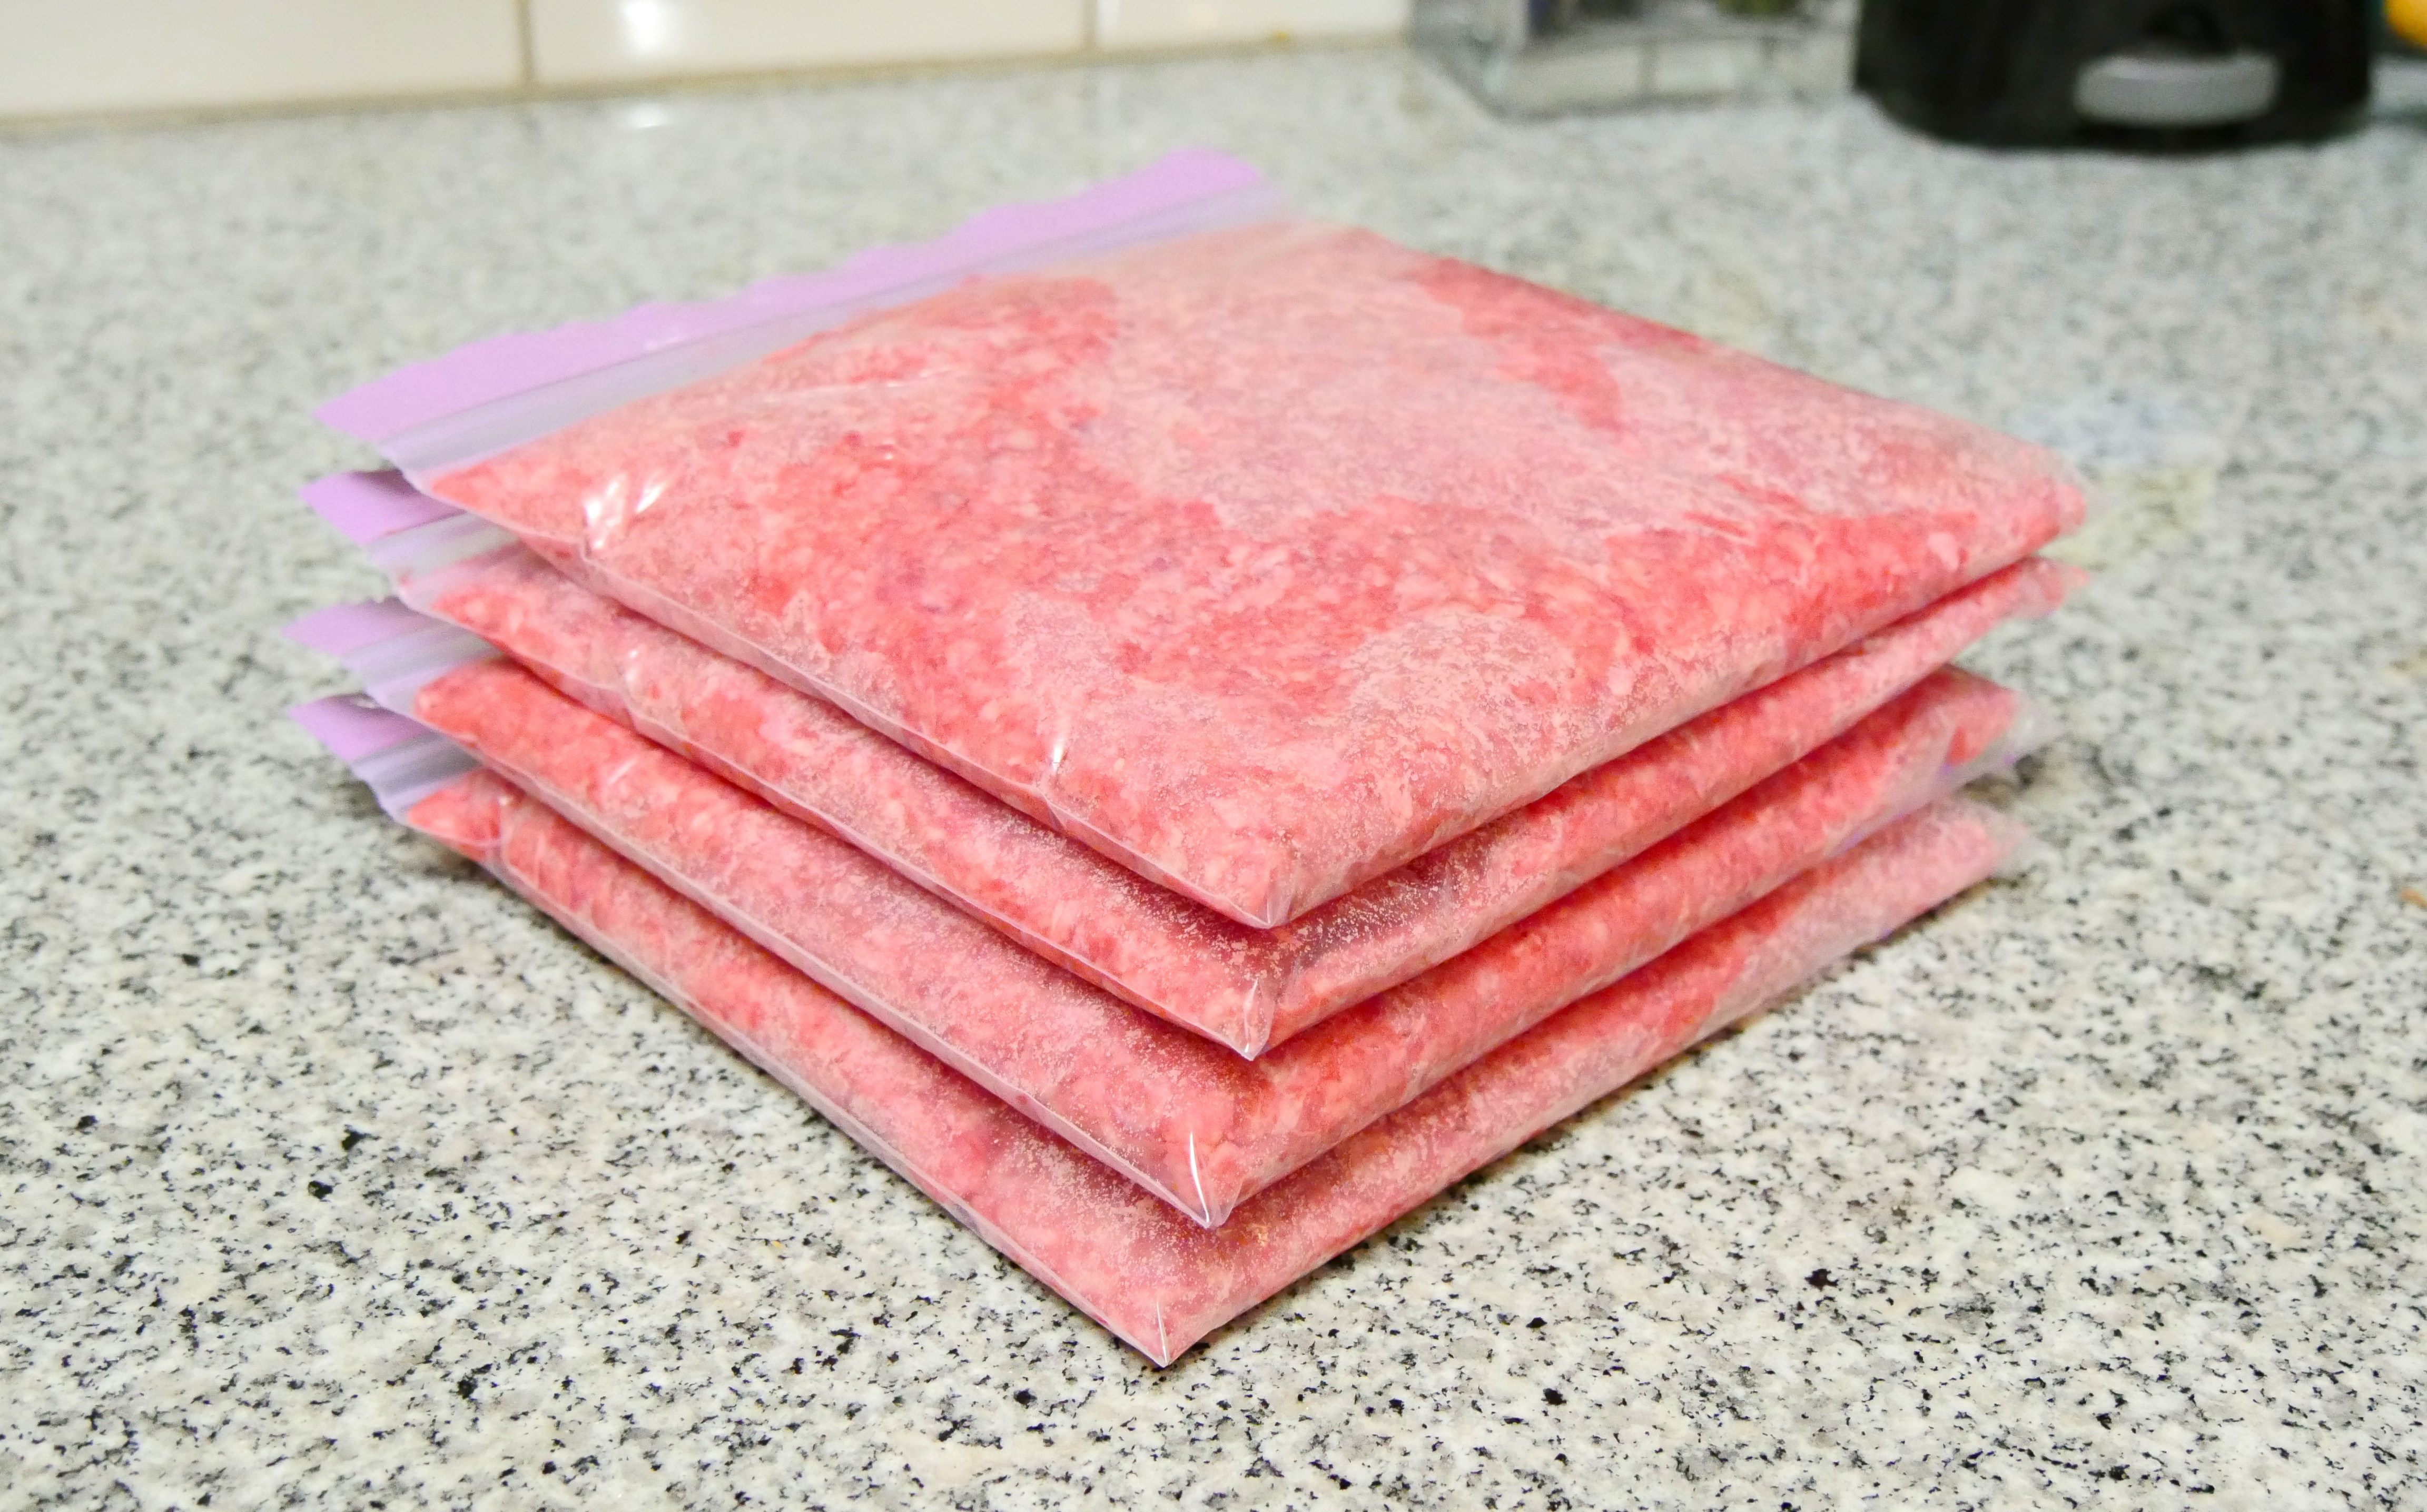 How To Defrost Ground Beef
 Freeze ground beef in flat bags for faster thawing CNET